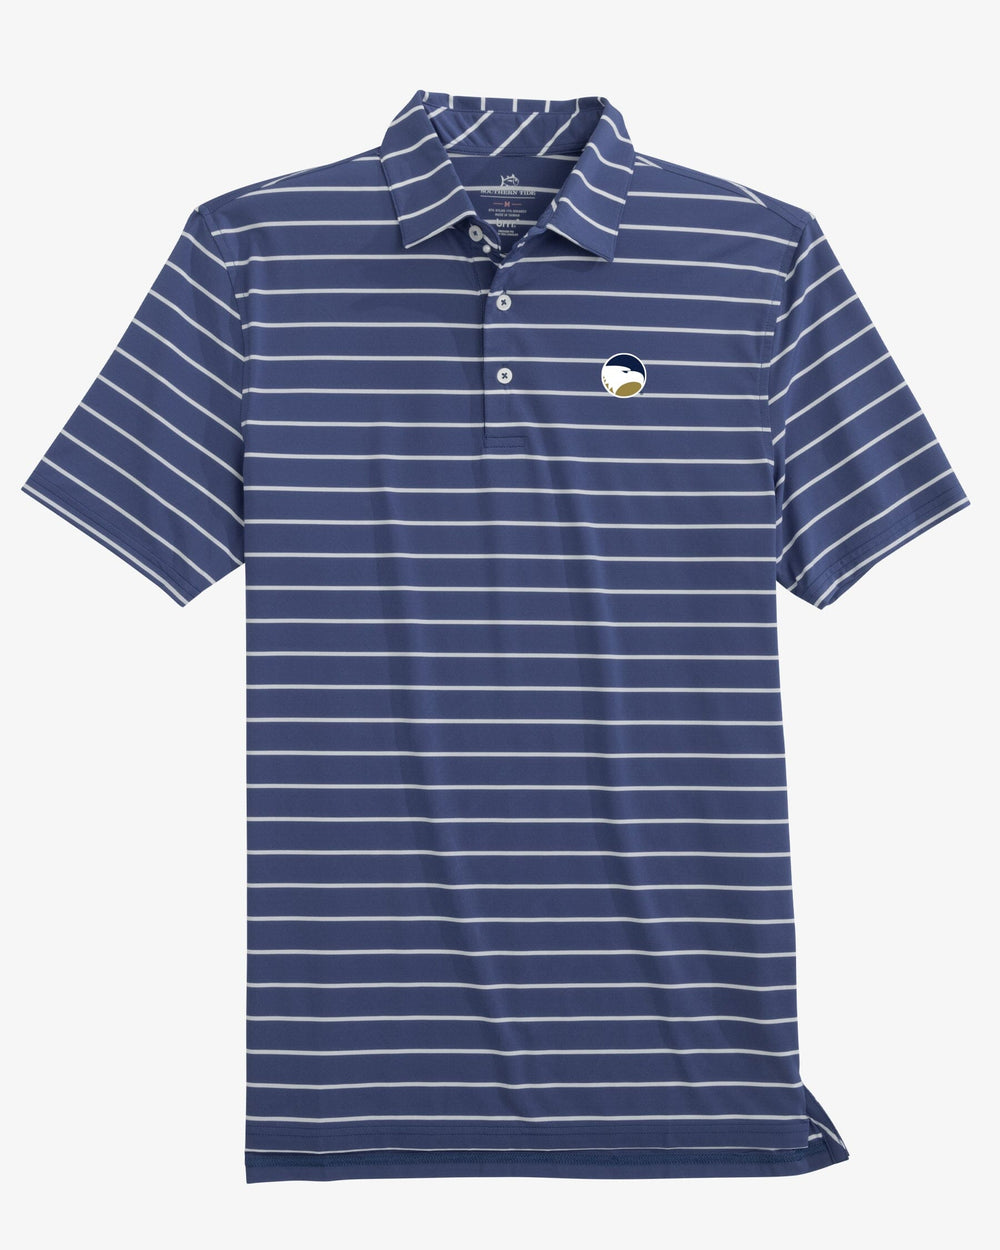 The front view of Georgia Southern Brreeze Desmond Stripe Performance Polo by Southern Tide - Navy